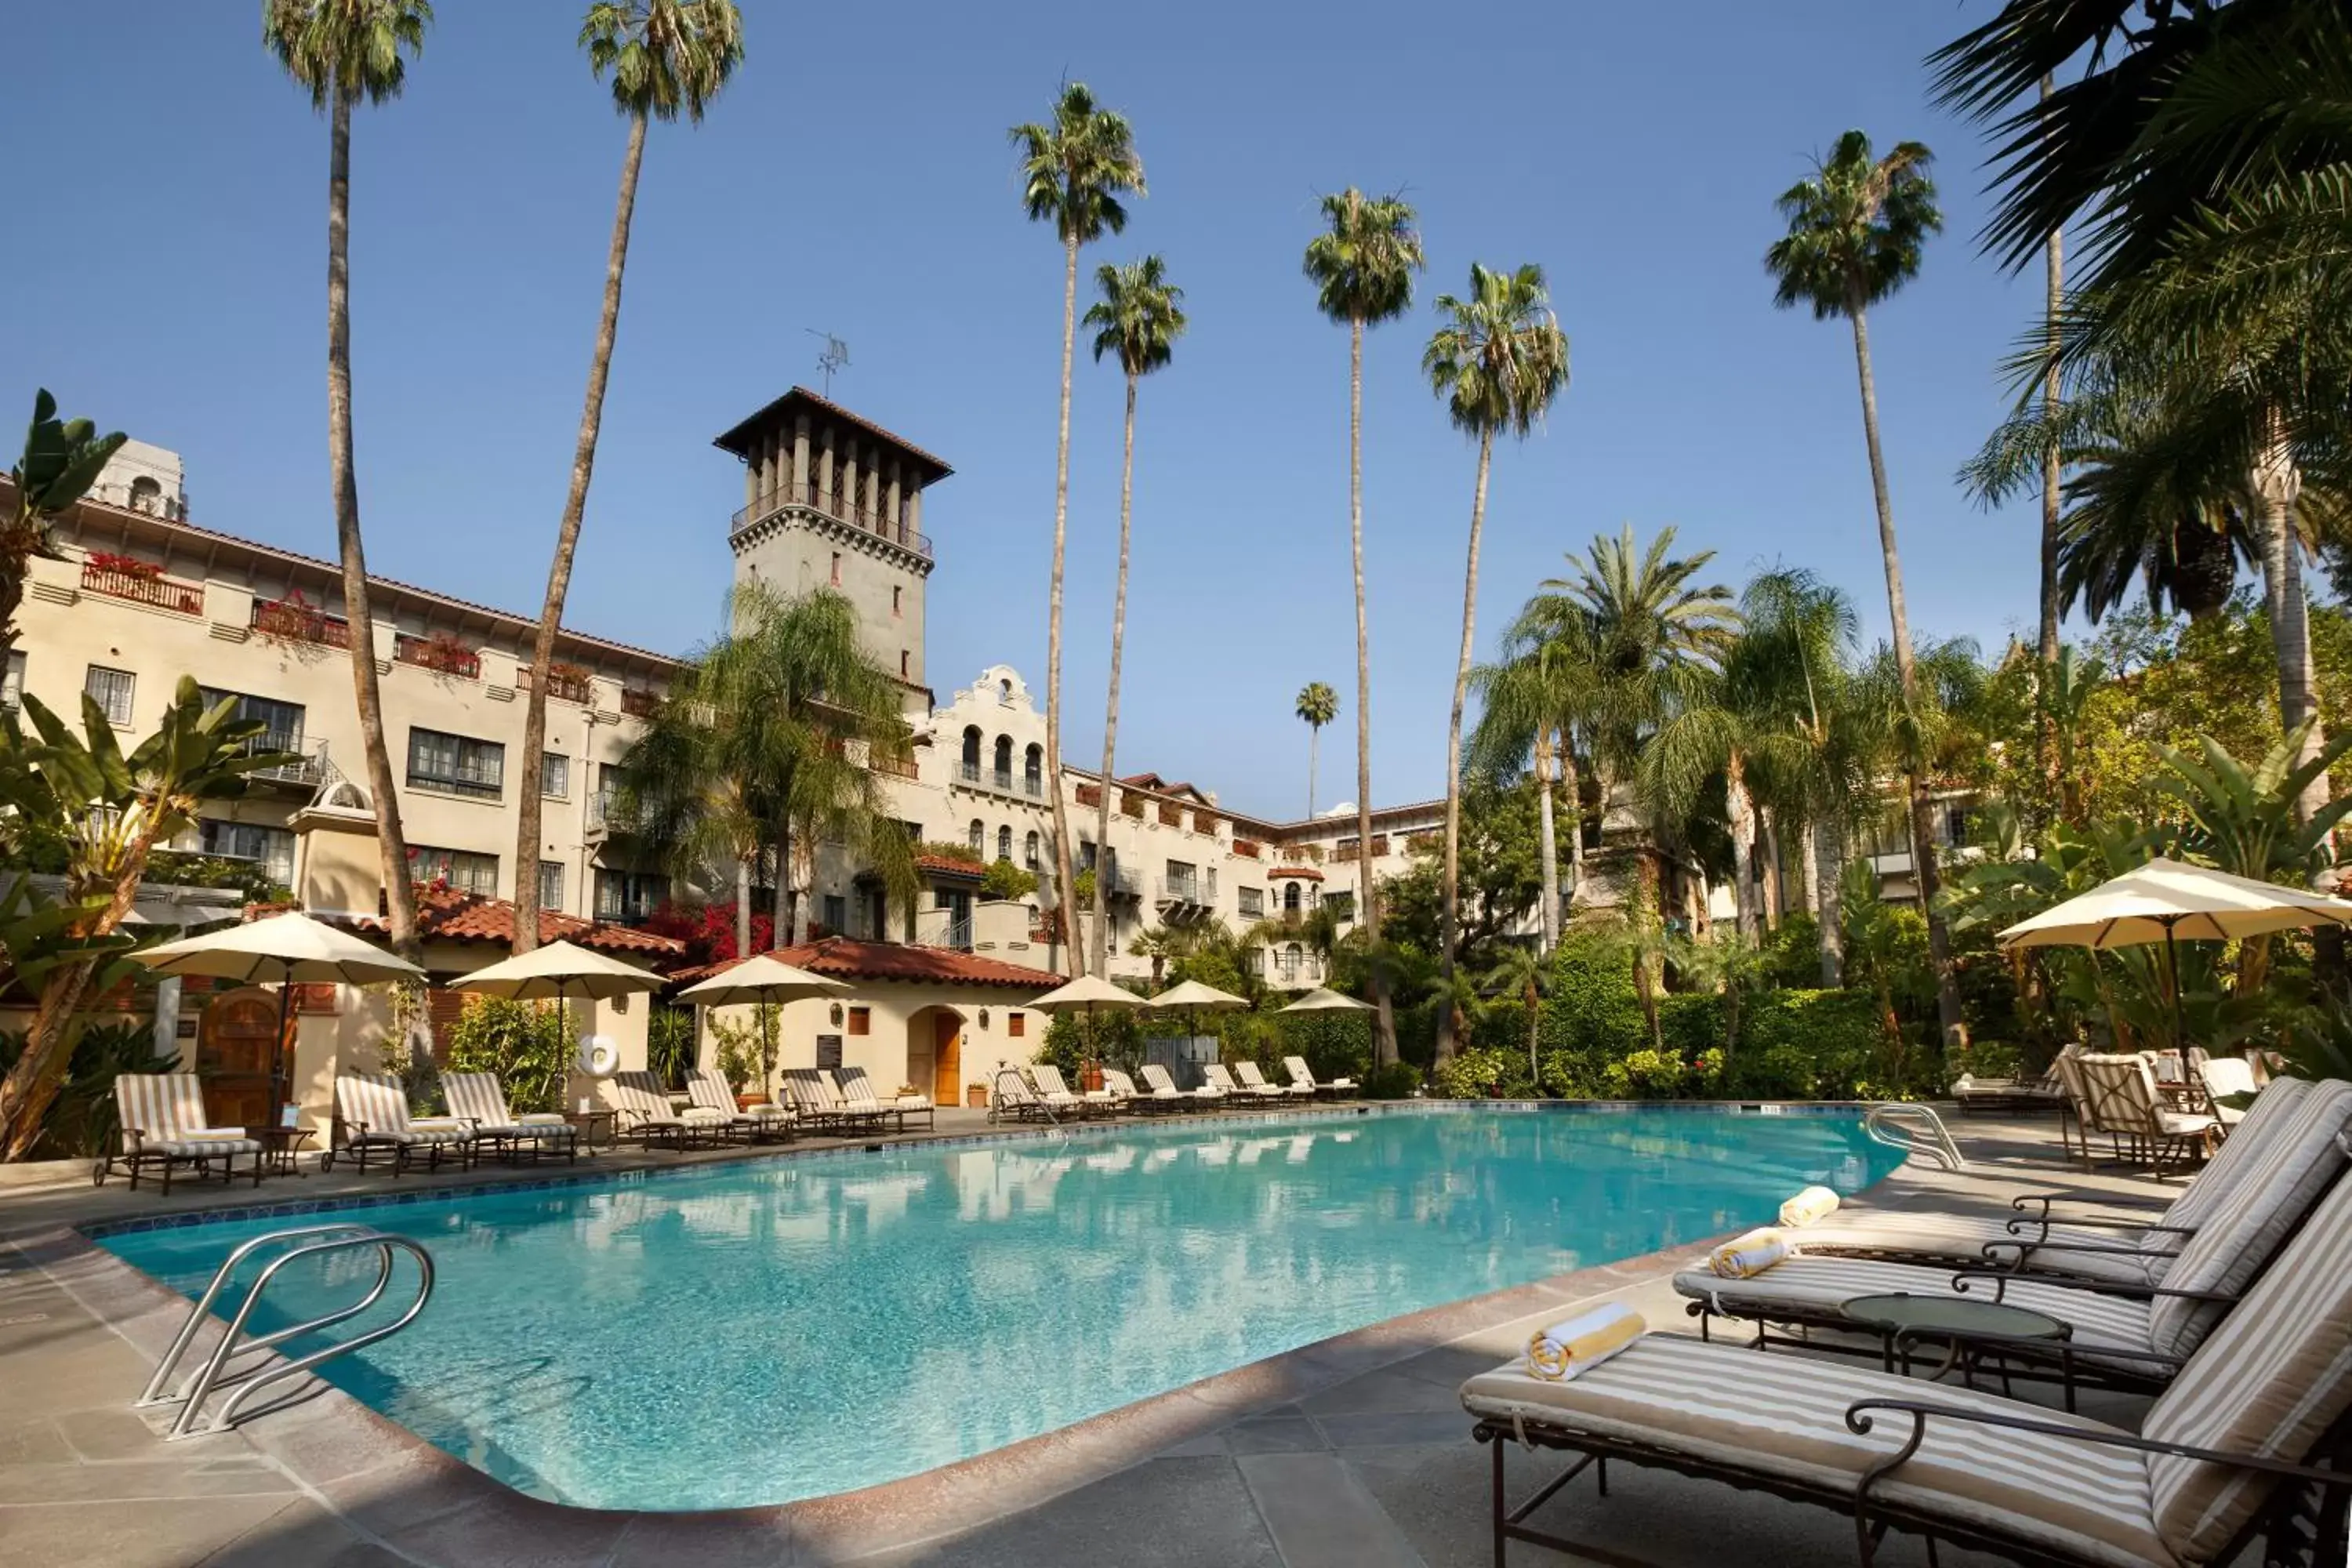 Swimming Pool in The Mission Inn Hotel and Spa